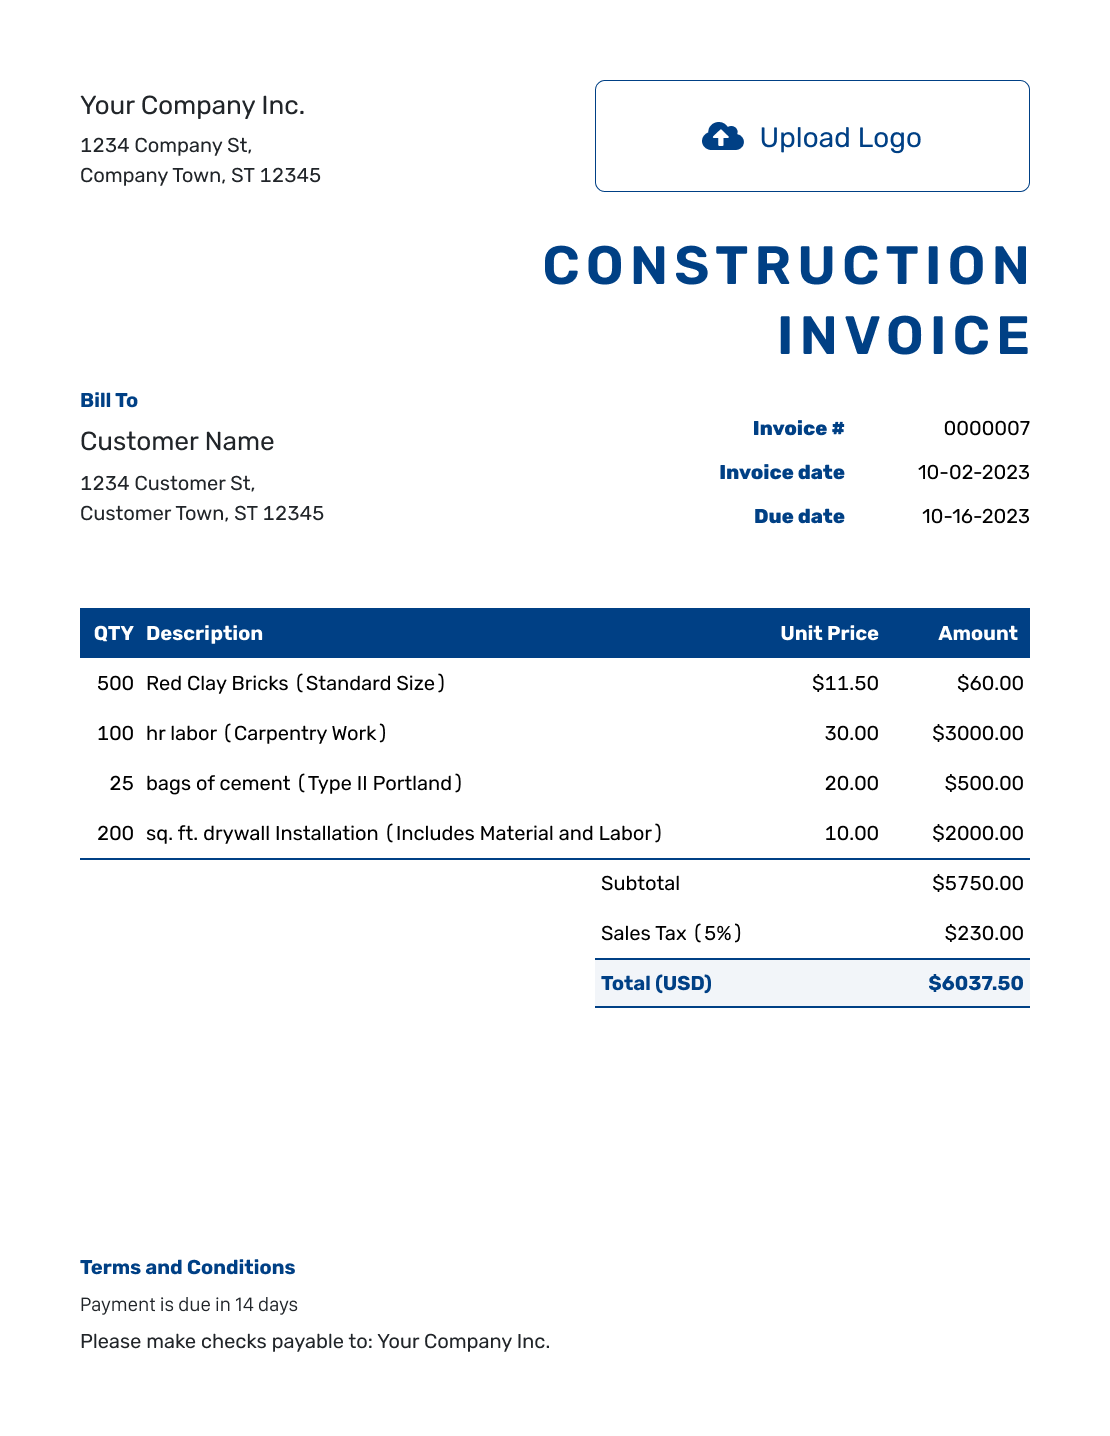 Sample Construction Invoice Template